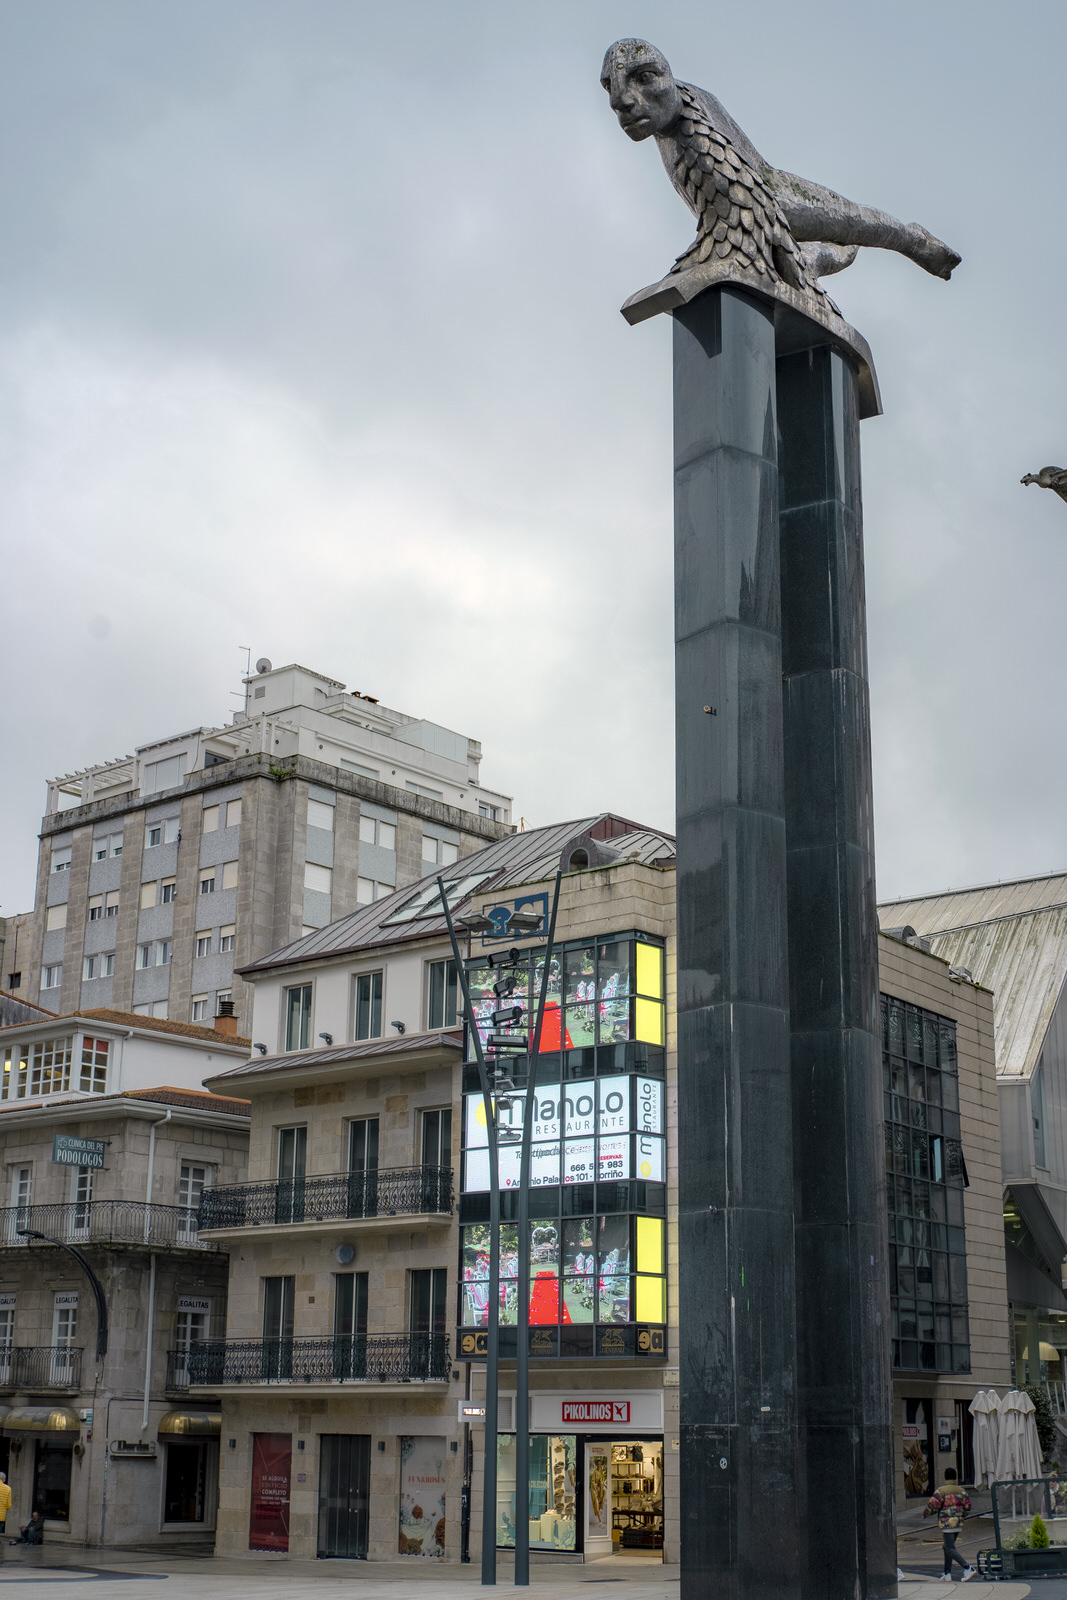 Image of a monument in Vigo in front of a classical building